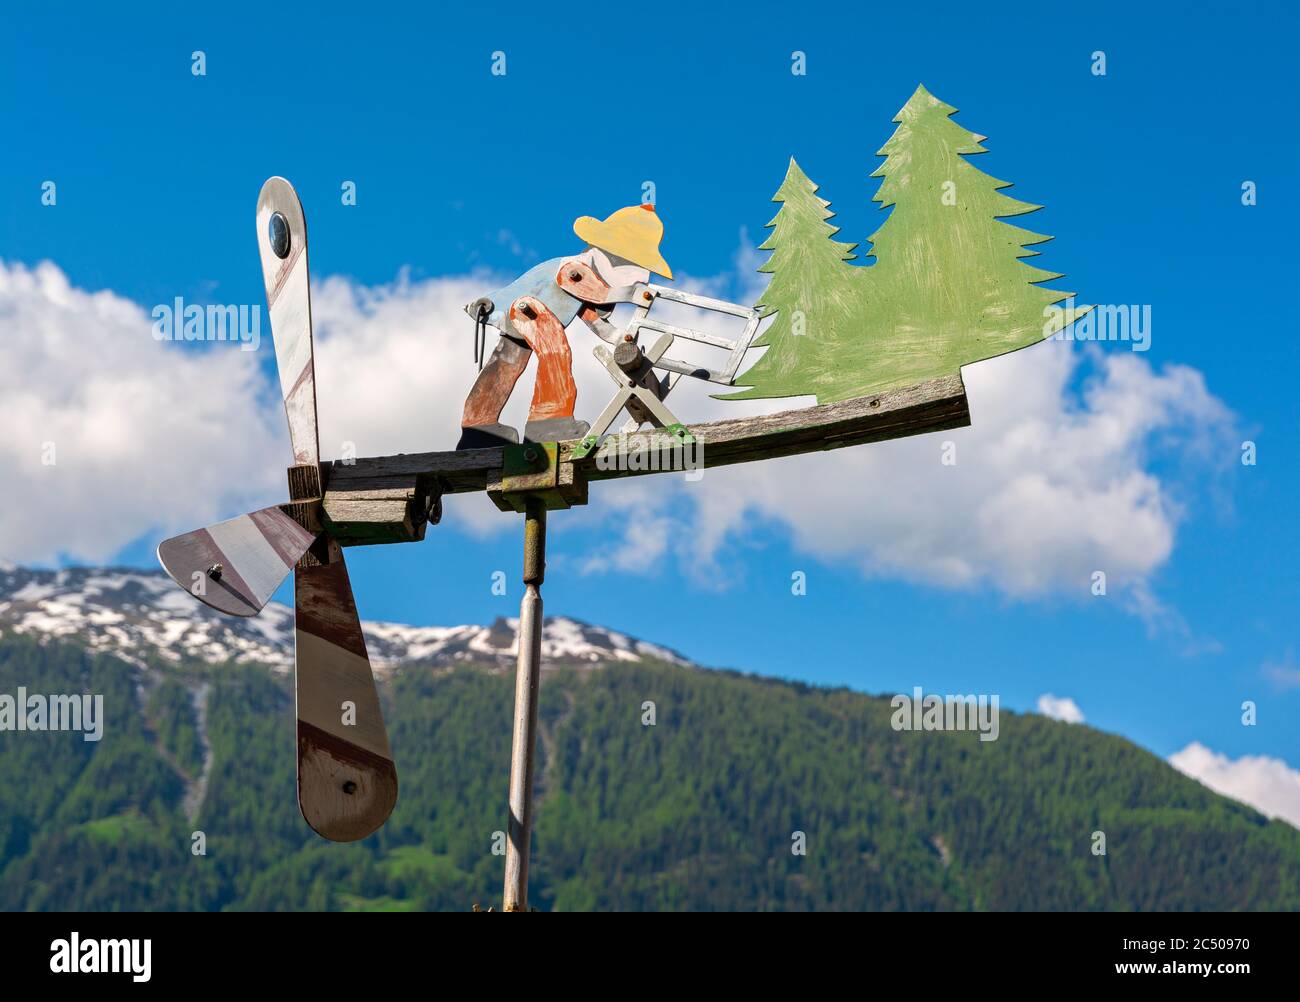 Switzerland, Valais Canton, Val d'Herens, Saint Martin, weather vane with wind driven moving figure Stock Photo